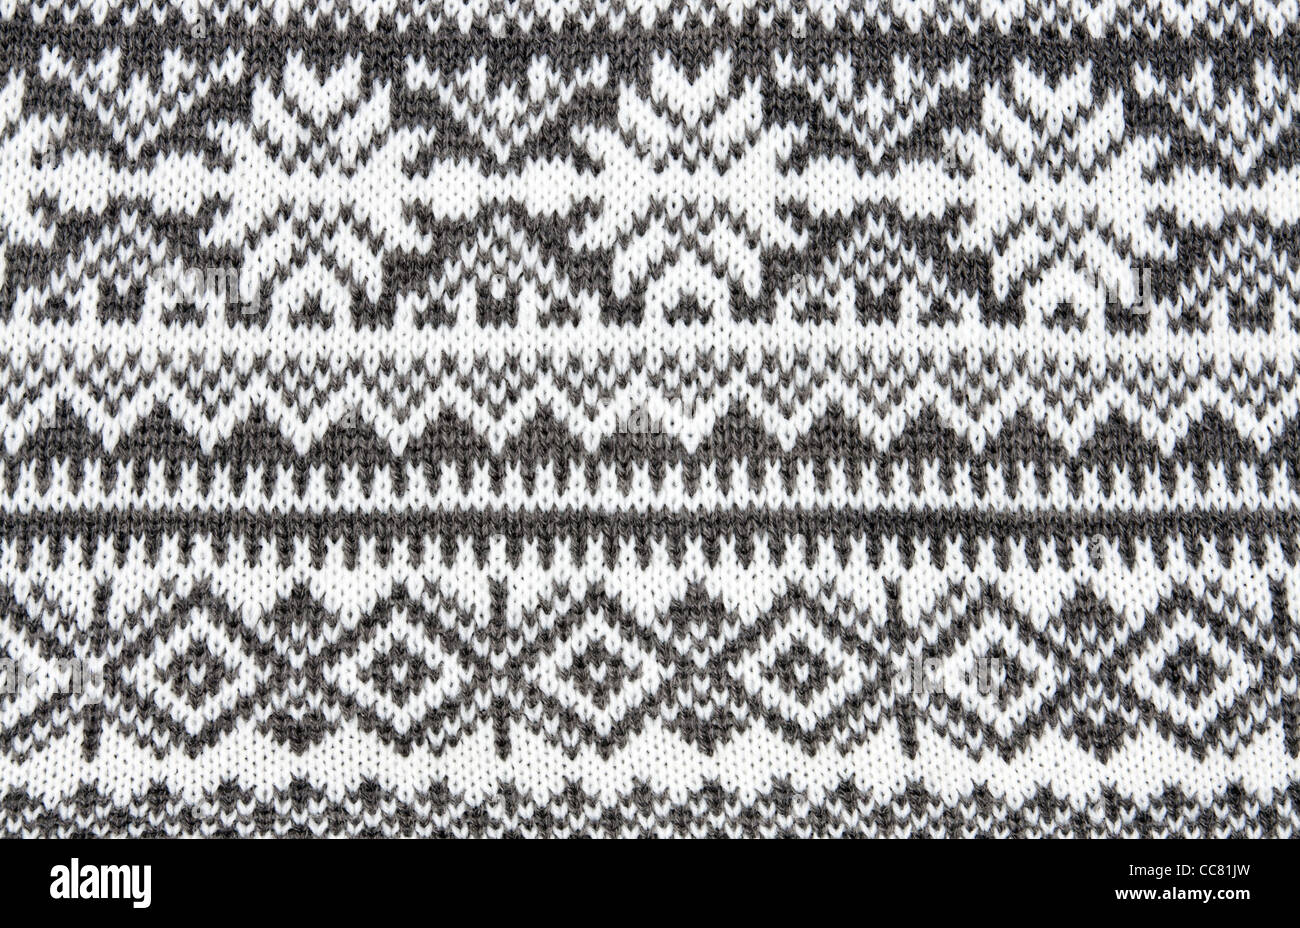 gray background with a knitted pattern to form snowflakes Stock Photo